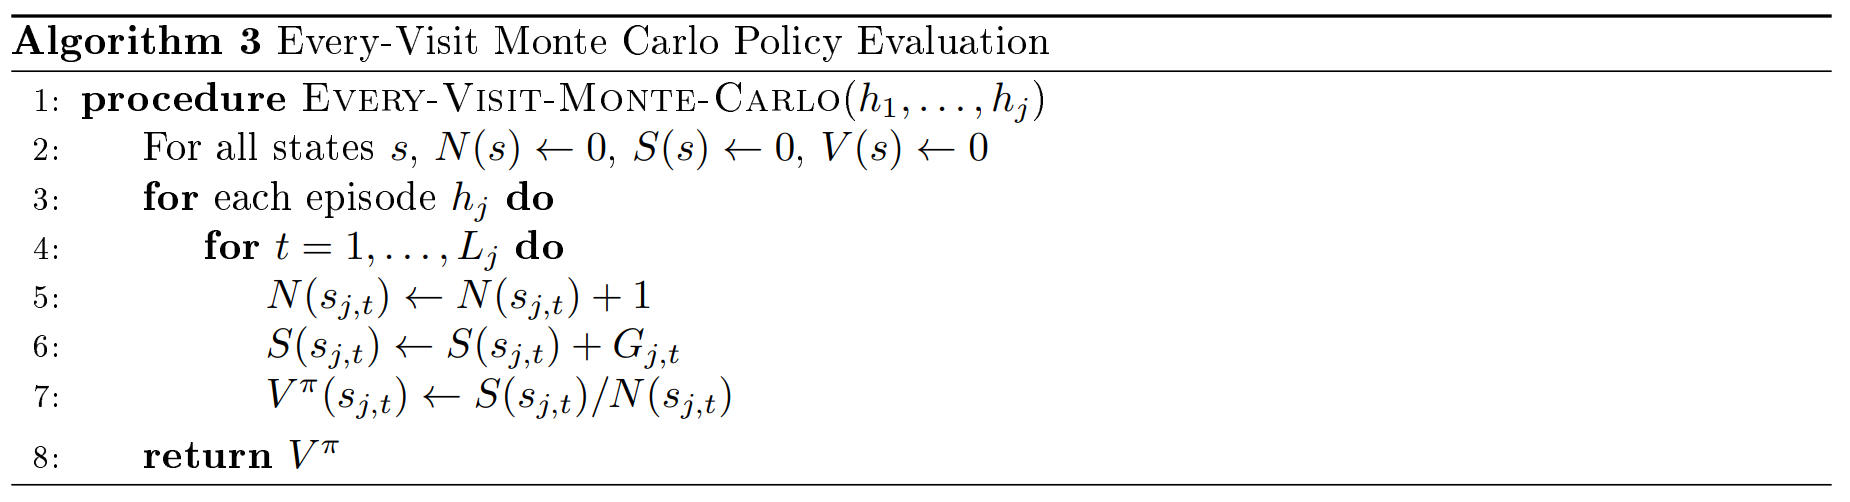 docs/stanford-cs234-notes-zh/img/fig3_alg_3.png